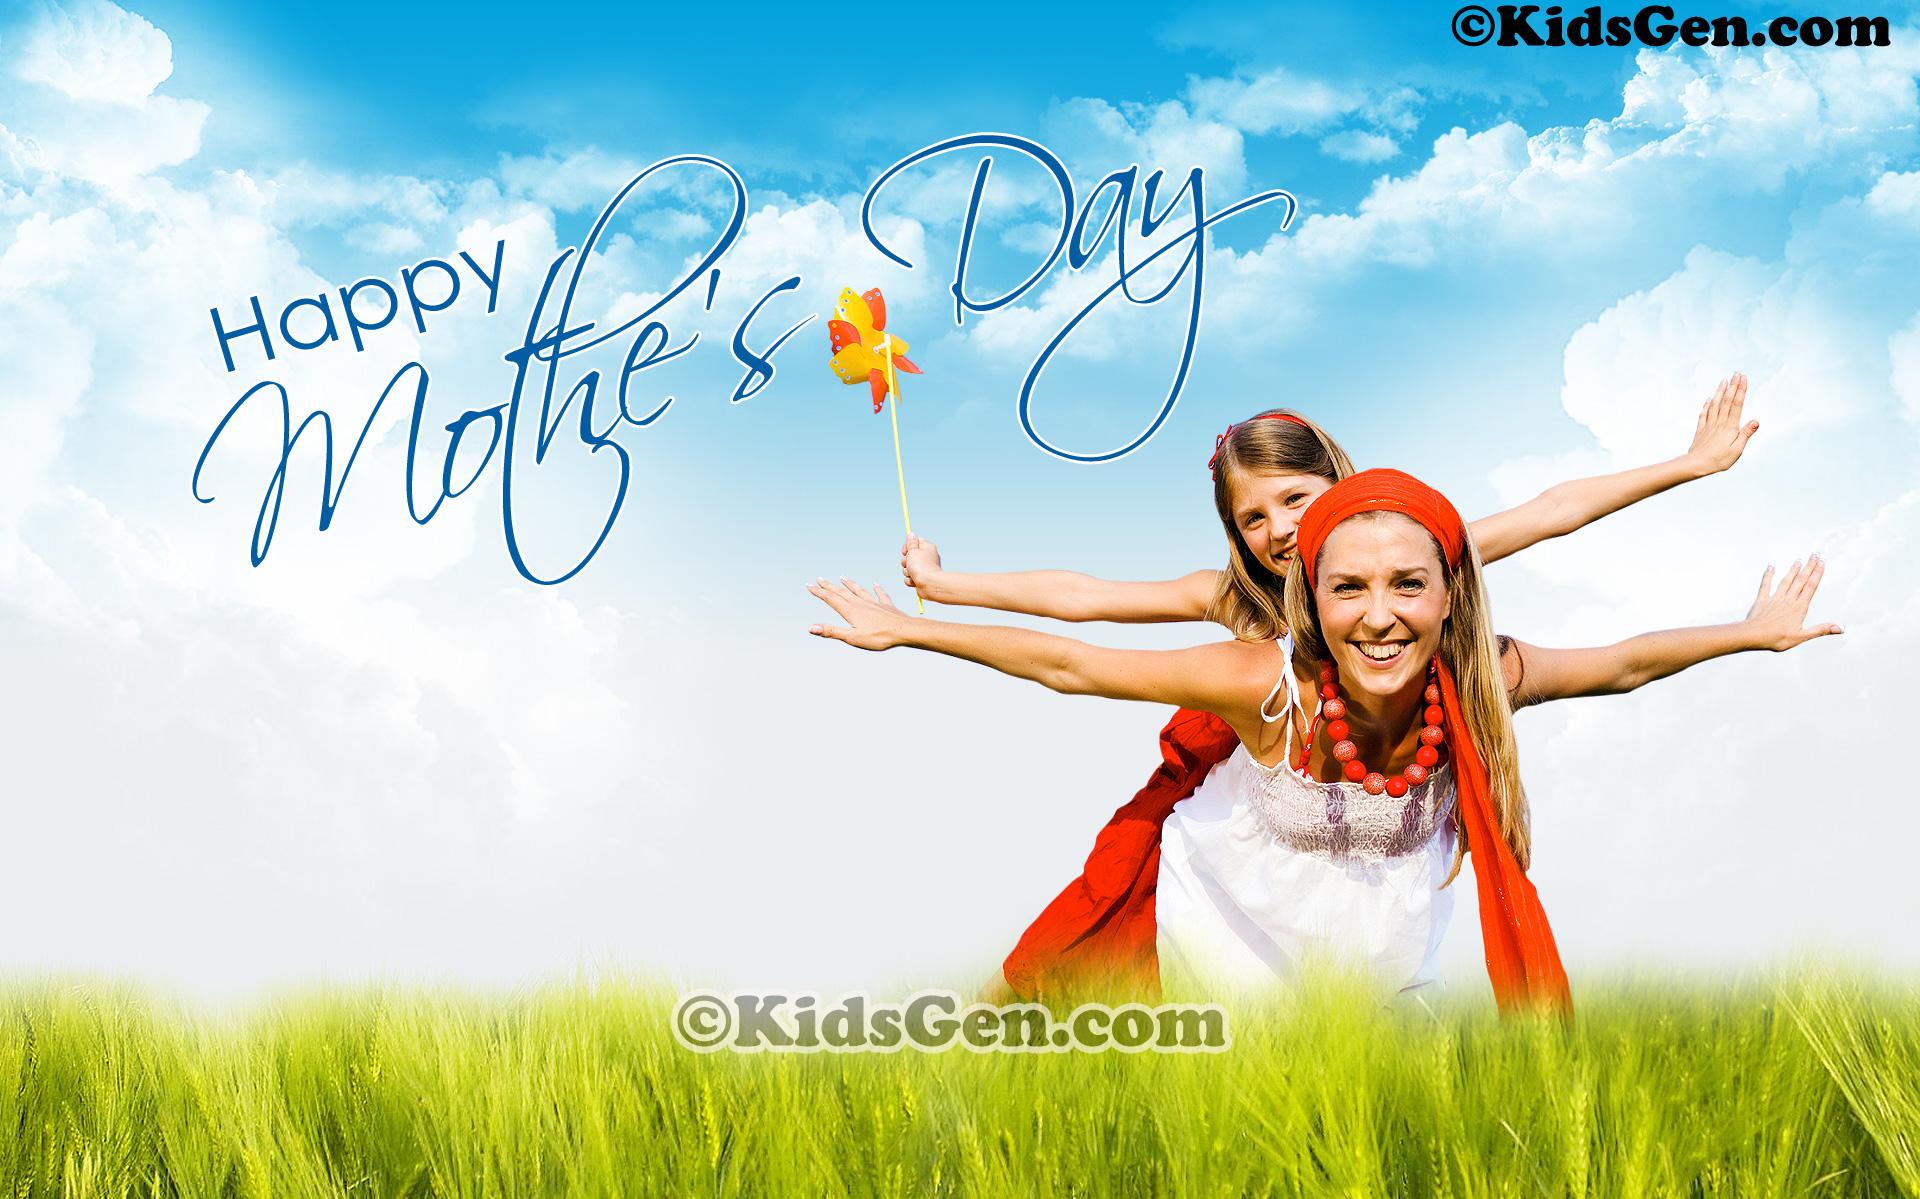 Mother S Day HD Wallpaper Image For Kids